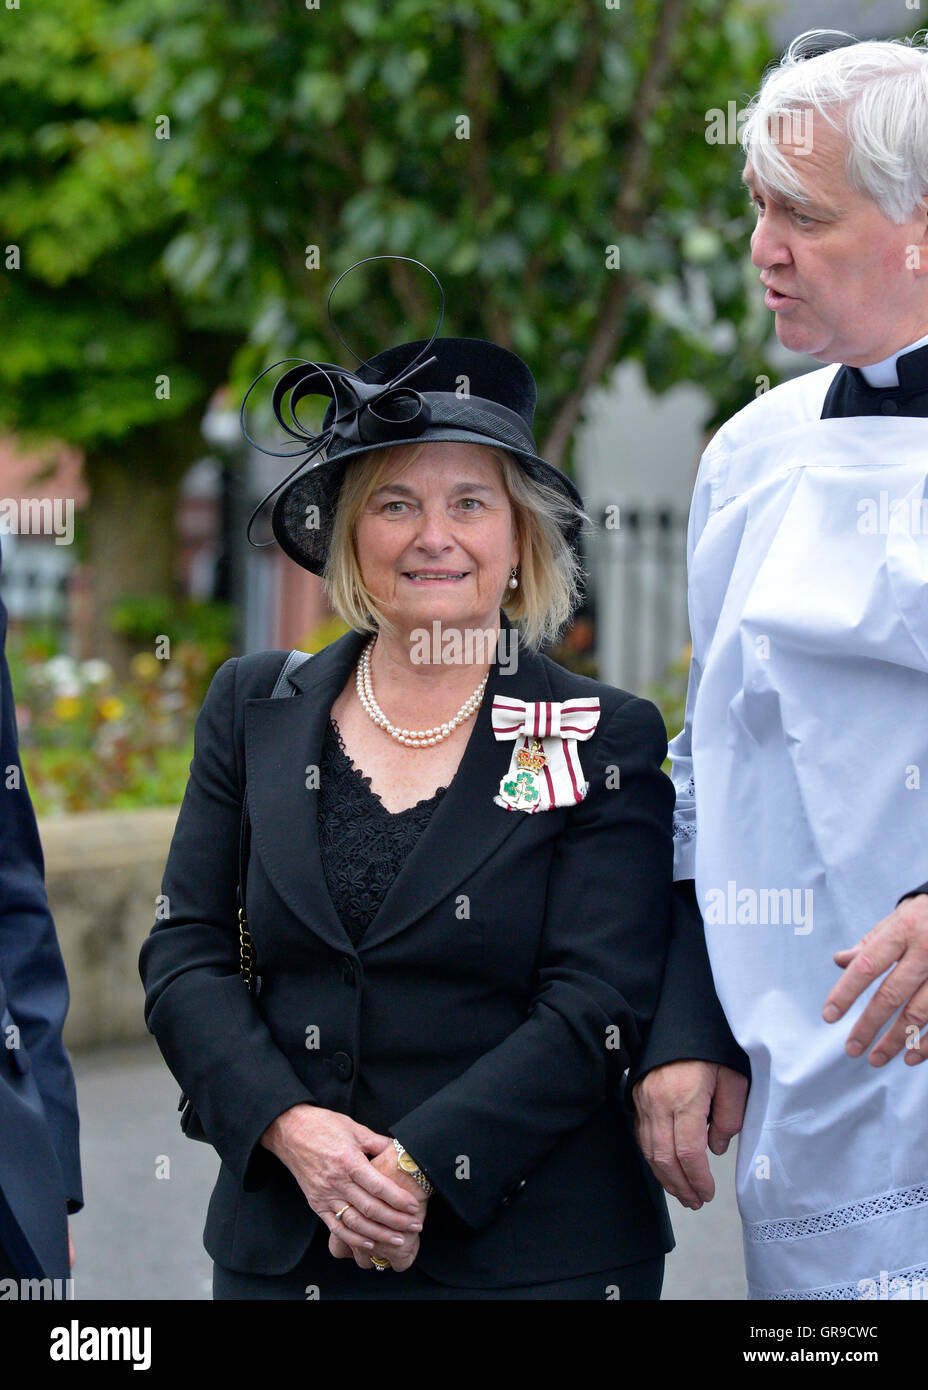 Dr Angela Garvey the Queen’s Lord-Lieutenant for the County Borough of Londonderry, Northern Ireland. ©George Sweeney/Alamy Stock Photo